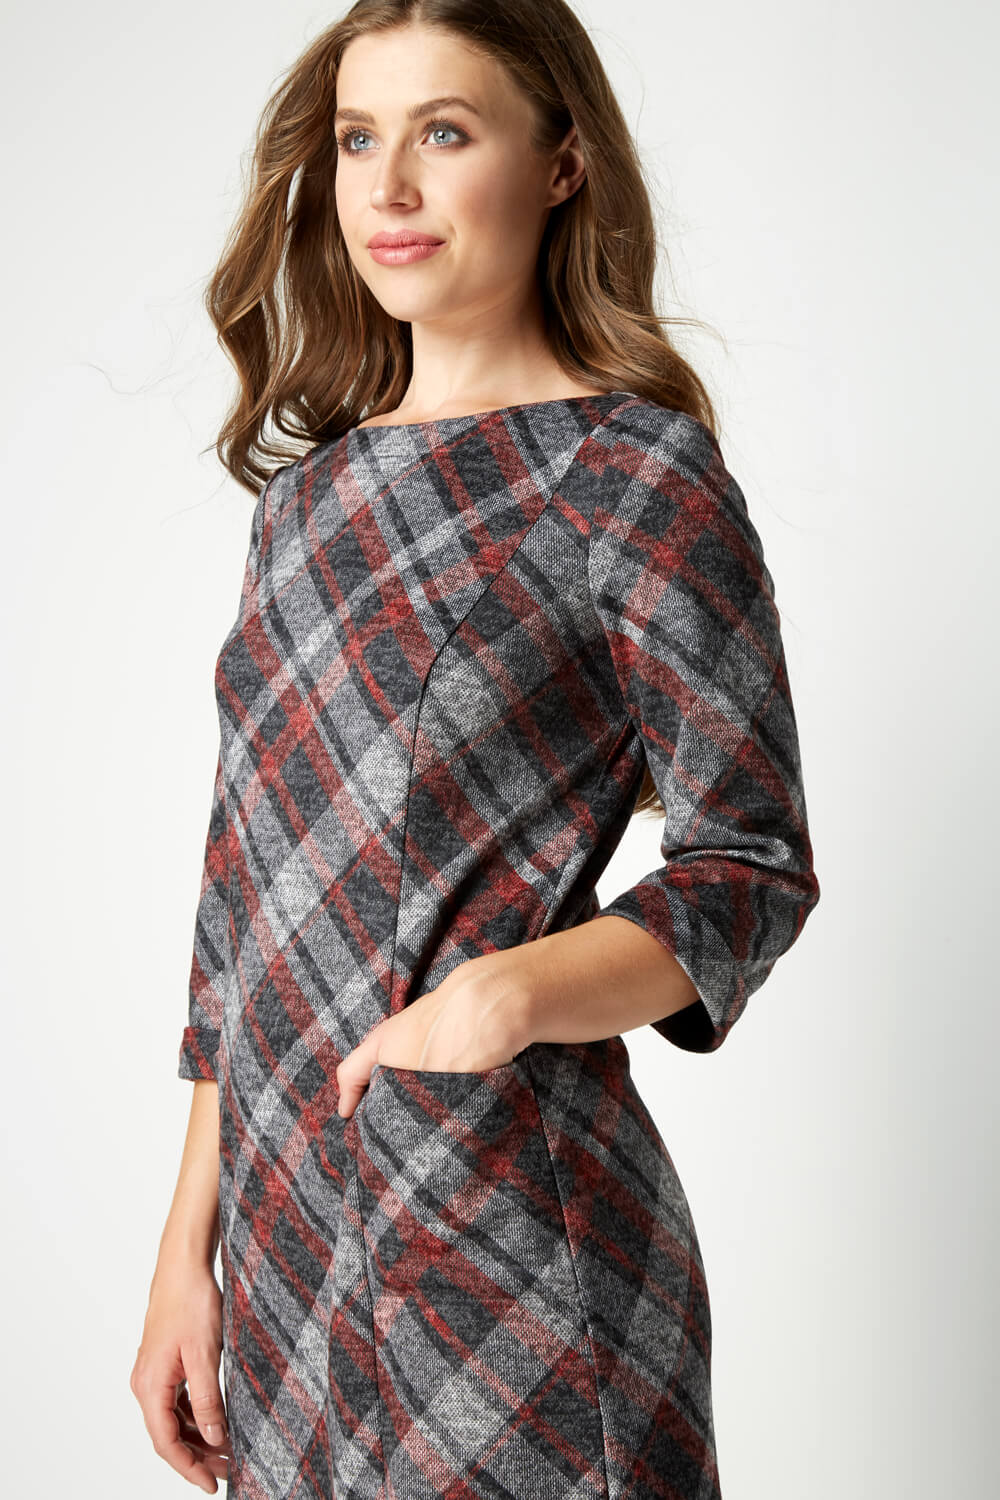 Red Check Print 3/4 Sleeve Shift Dress, Image 3 of 4